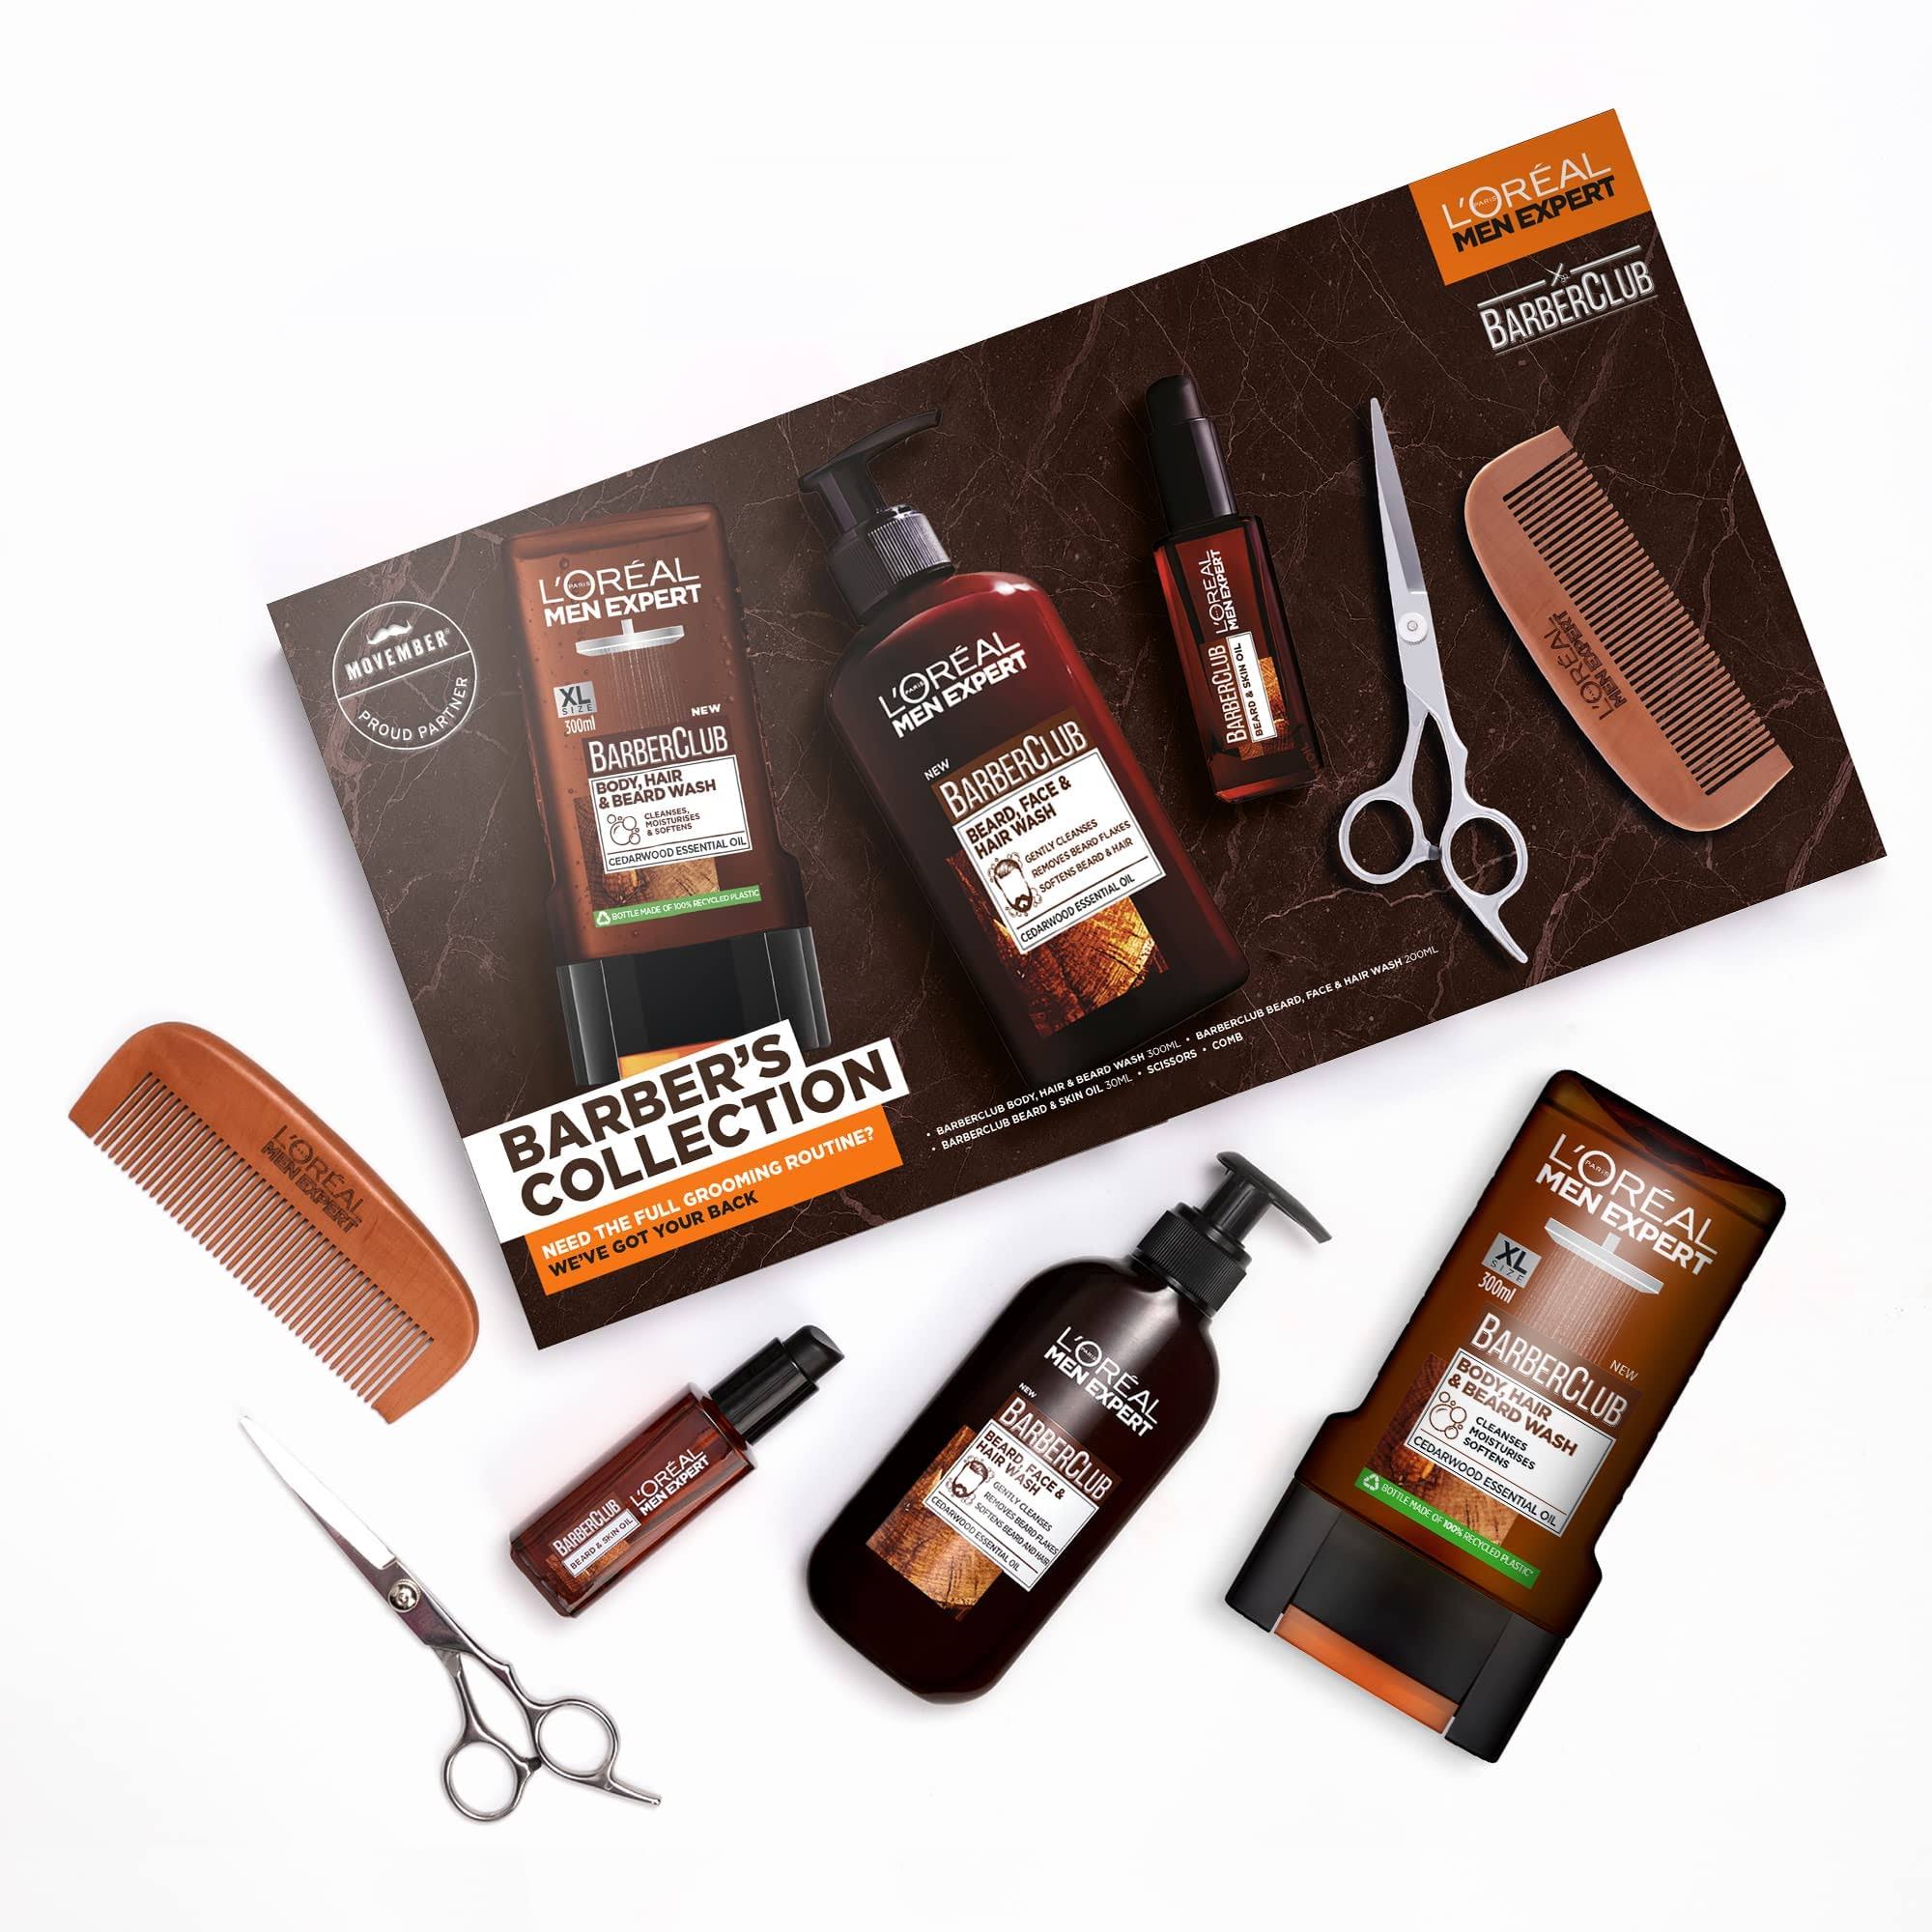 L'Oreal Men Expert Barbers Collection Gift Set